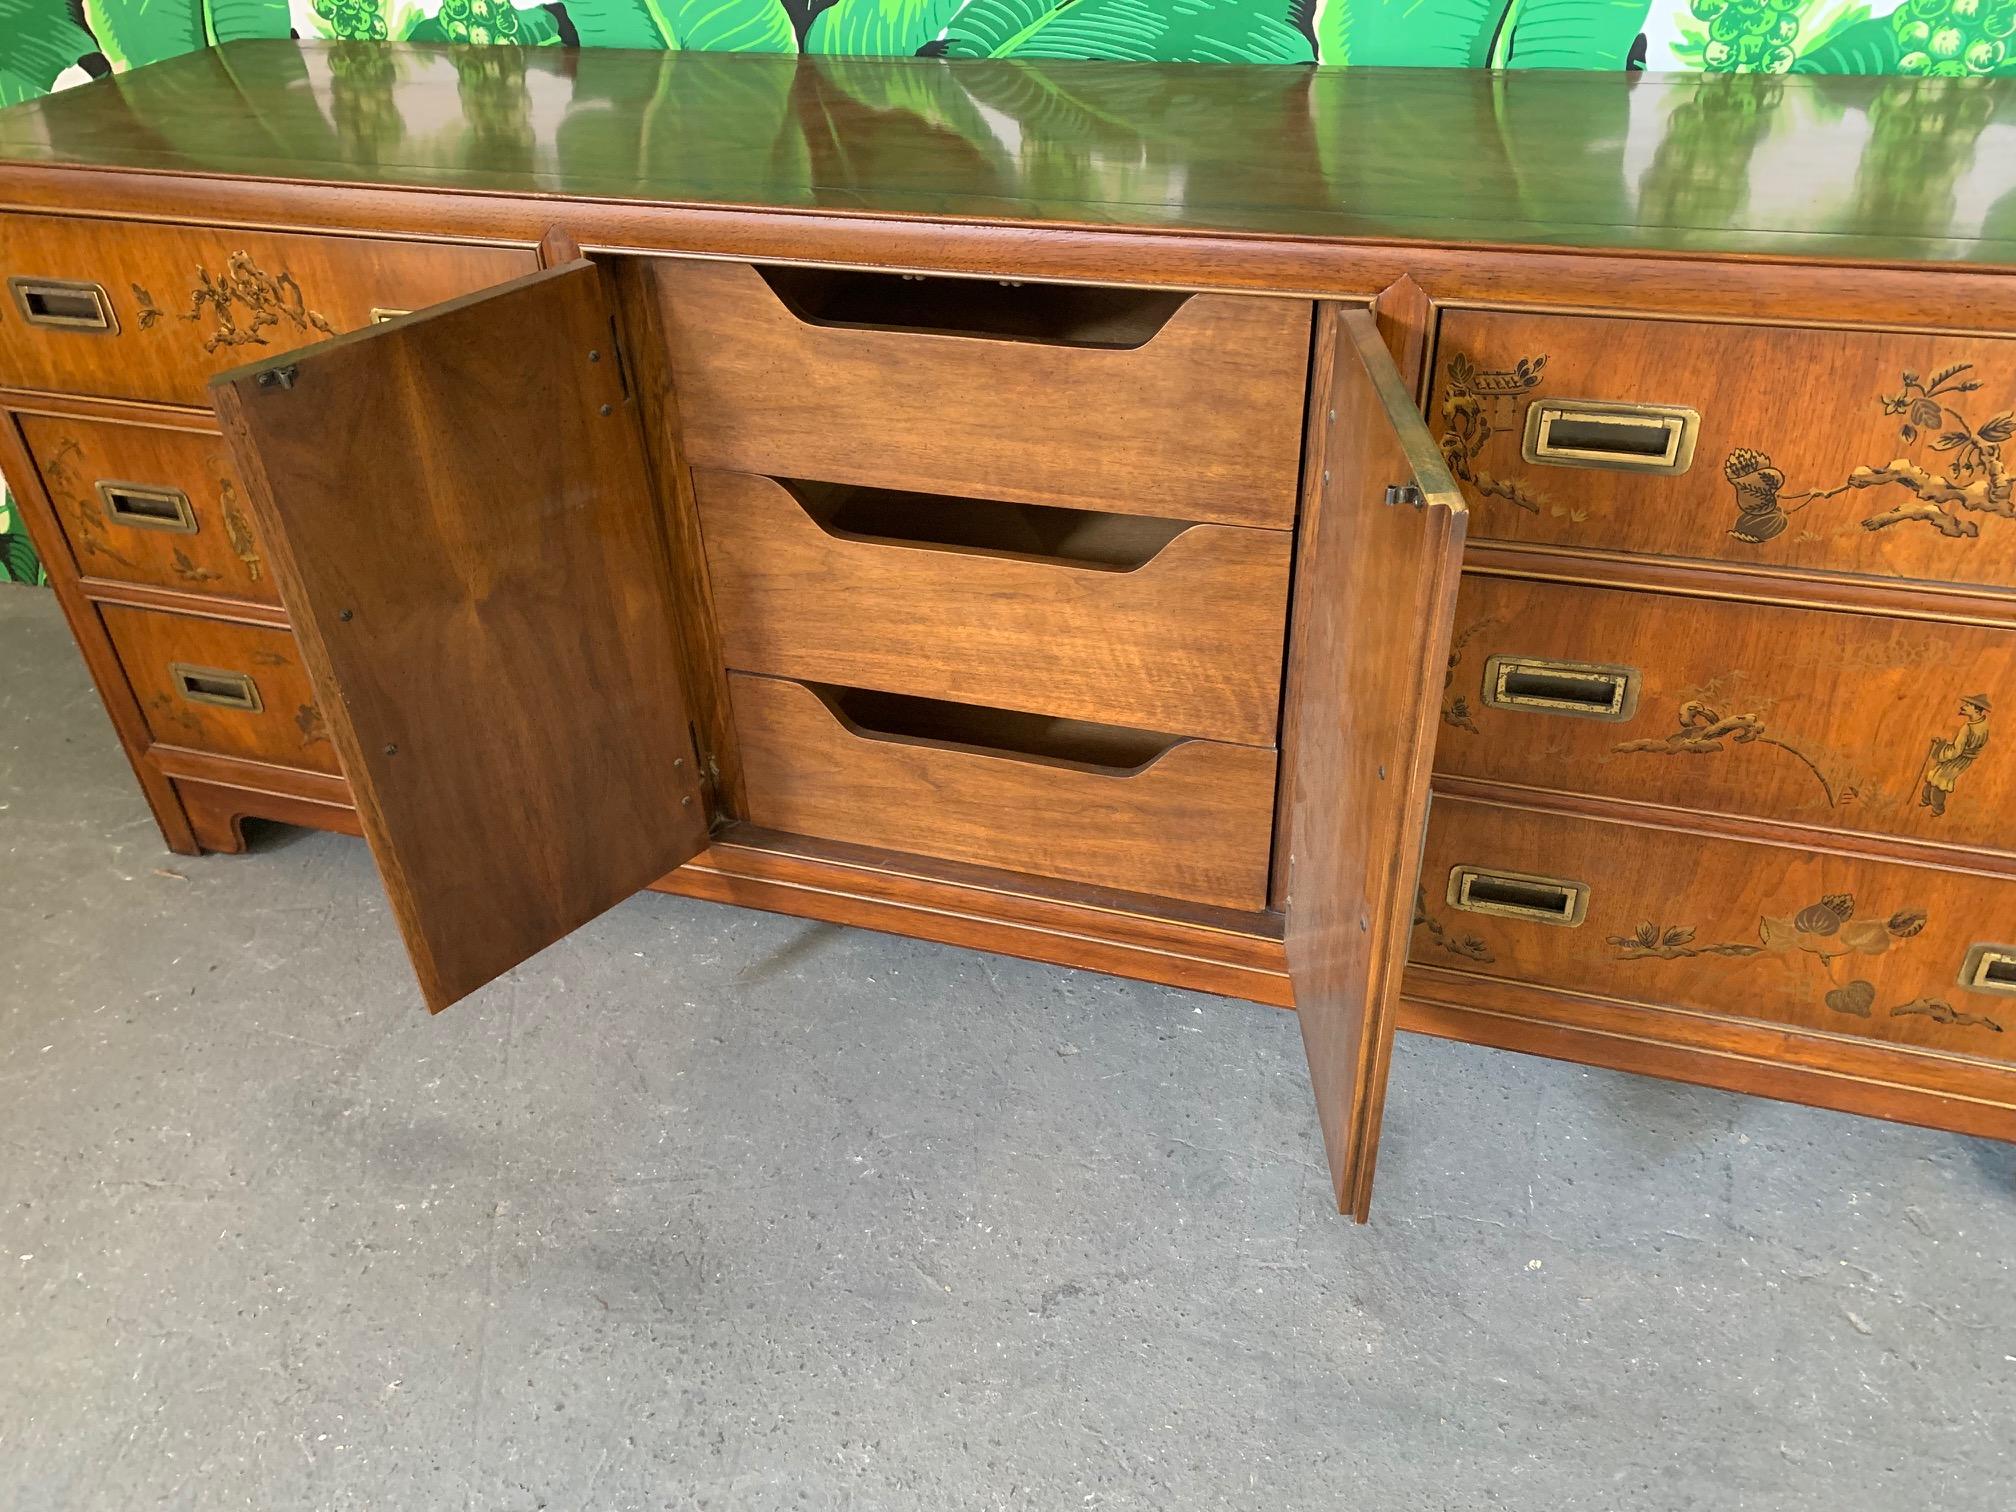 Vintage dresser from the Dynasty collection by Heritage Furniture features hand painted detailing and heavy brass hardware. Very good vintage condition with minor imperfections consistent with age.